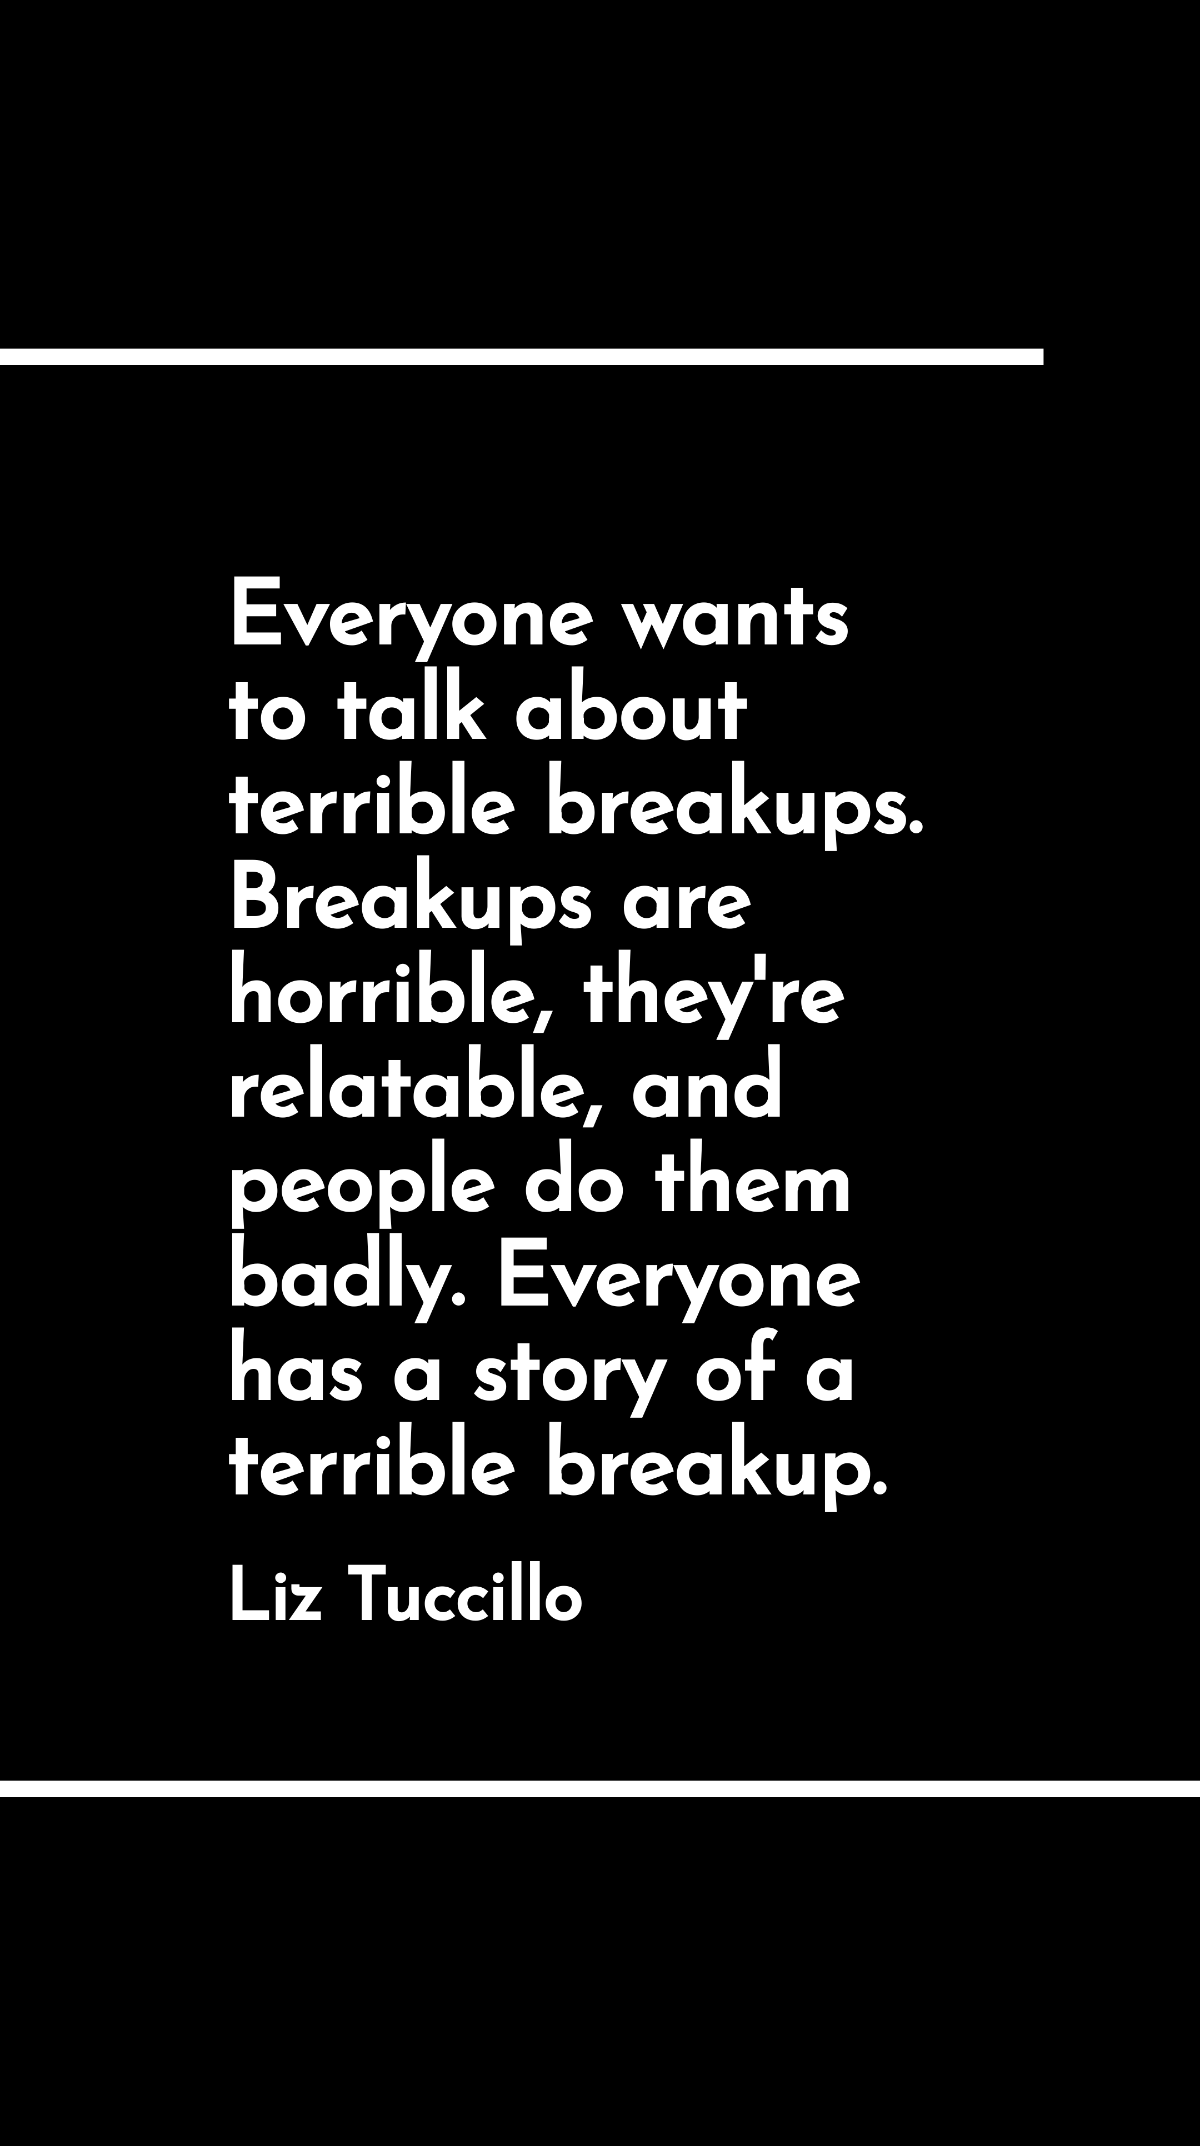 Liz Tuccillo - Everyone wants to talk about terrible breakups. Breakups are horrible, they're relatable, and people do them badly. Everyone has a story of a terrible breakup.